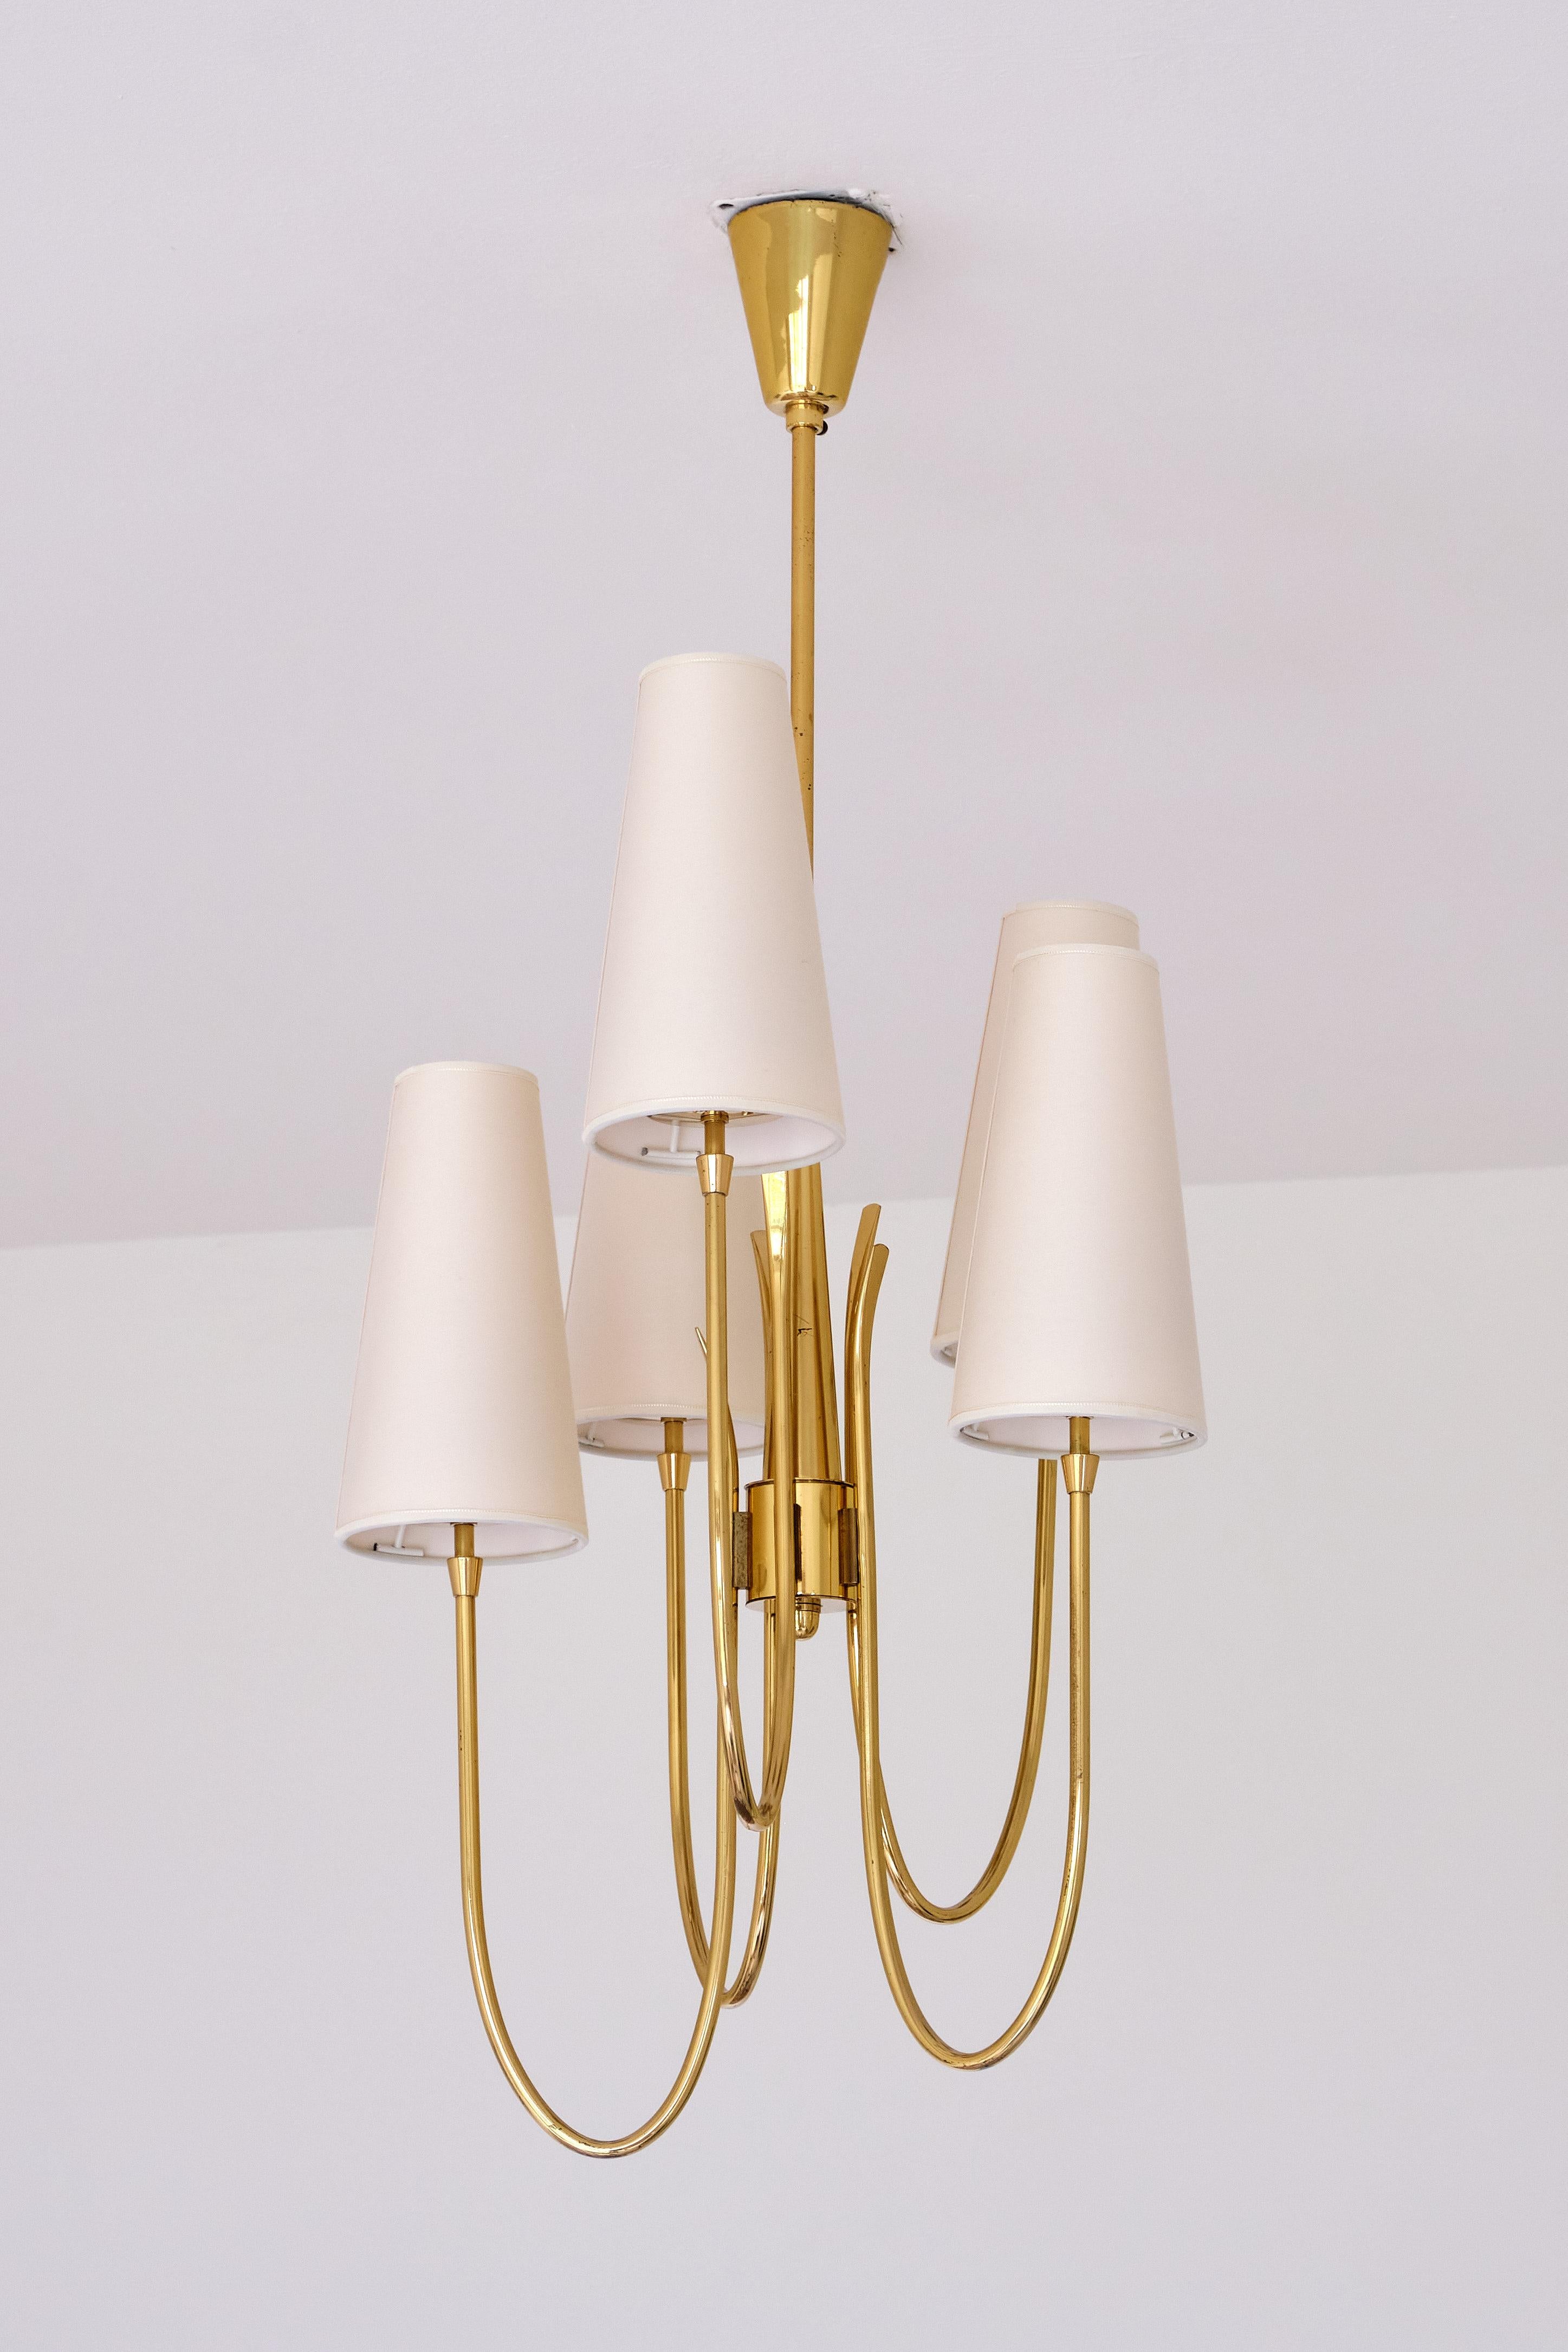 Guglielmo Ulrich Attributed Five Arm Chandelier, Brass and Fabric, Italy, 1940s 5